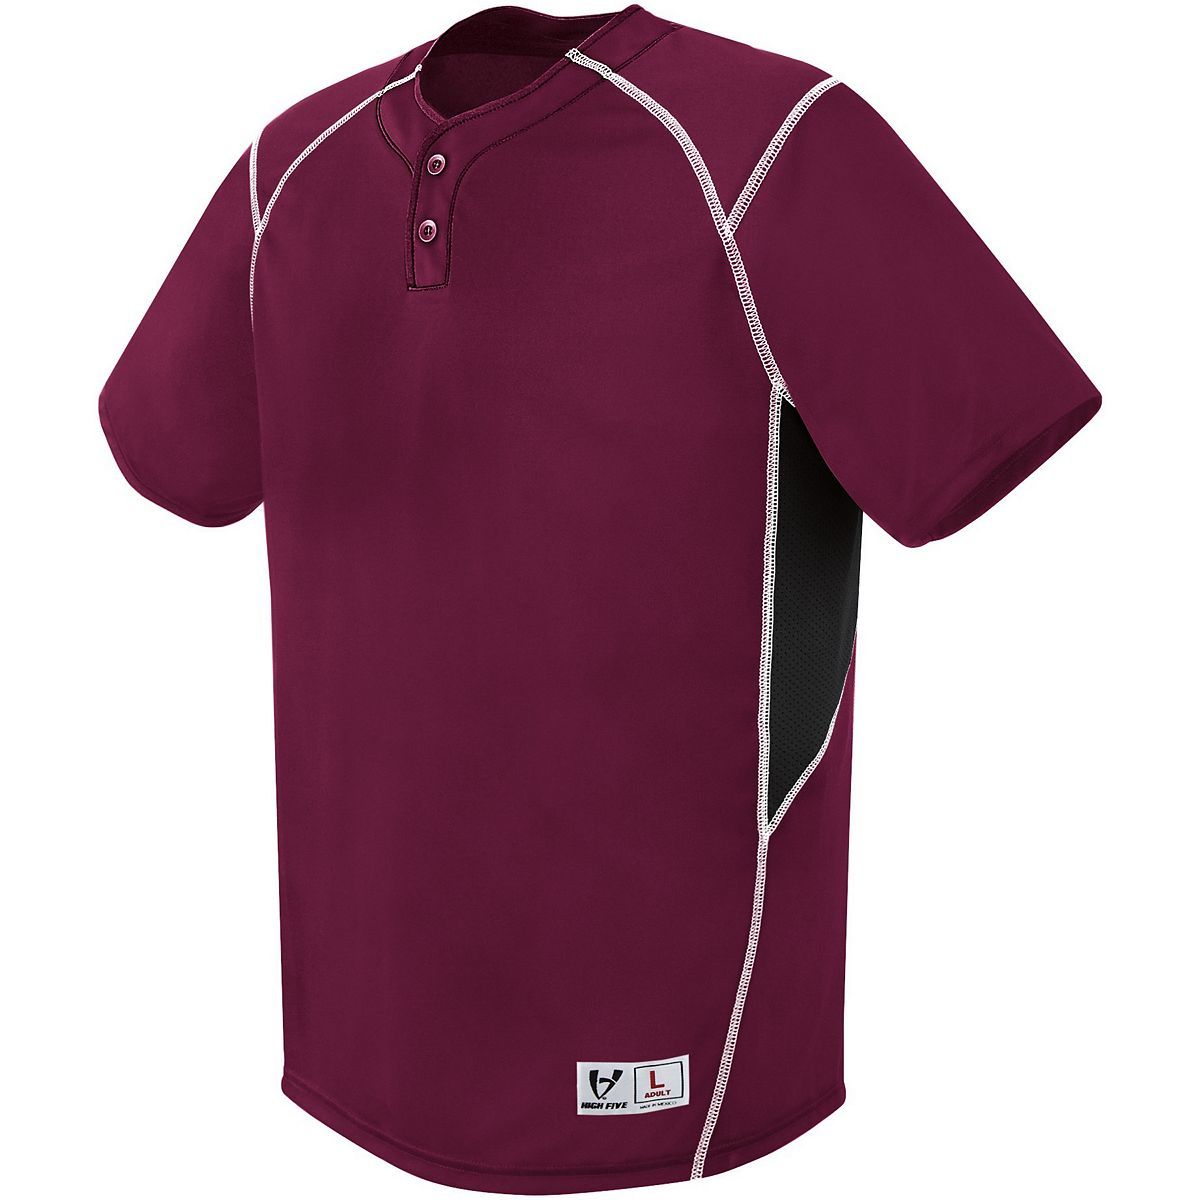 Augusta Sportswear Youth Bandit Two-Button Jersey in Maroon/Black/White  -Part of the Youth, Youth-Jersey, Augusta-Products, Baseball, Shirts, All-Sports, All-Sports-1 product lines at KanaleyCreations.com